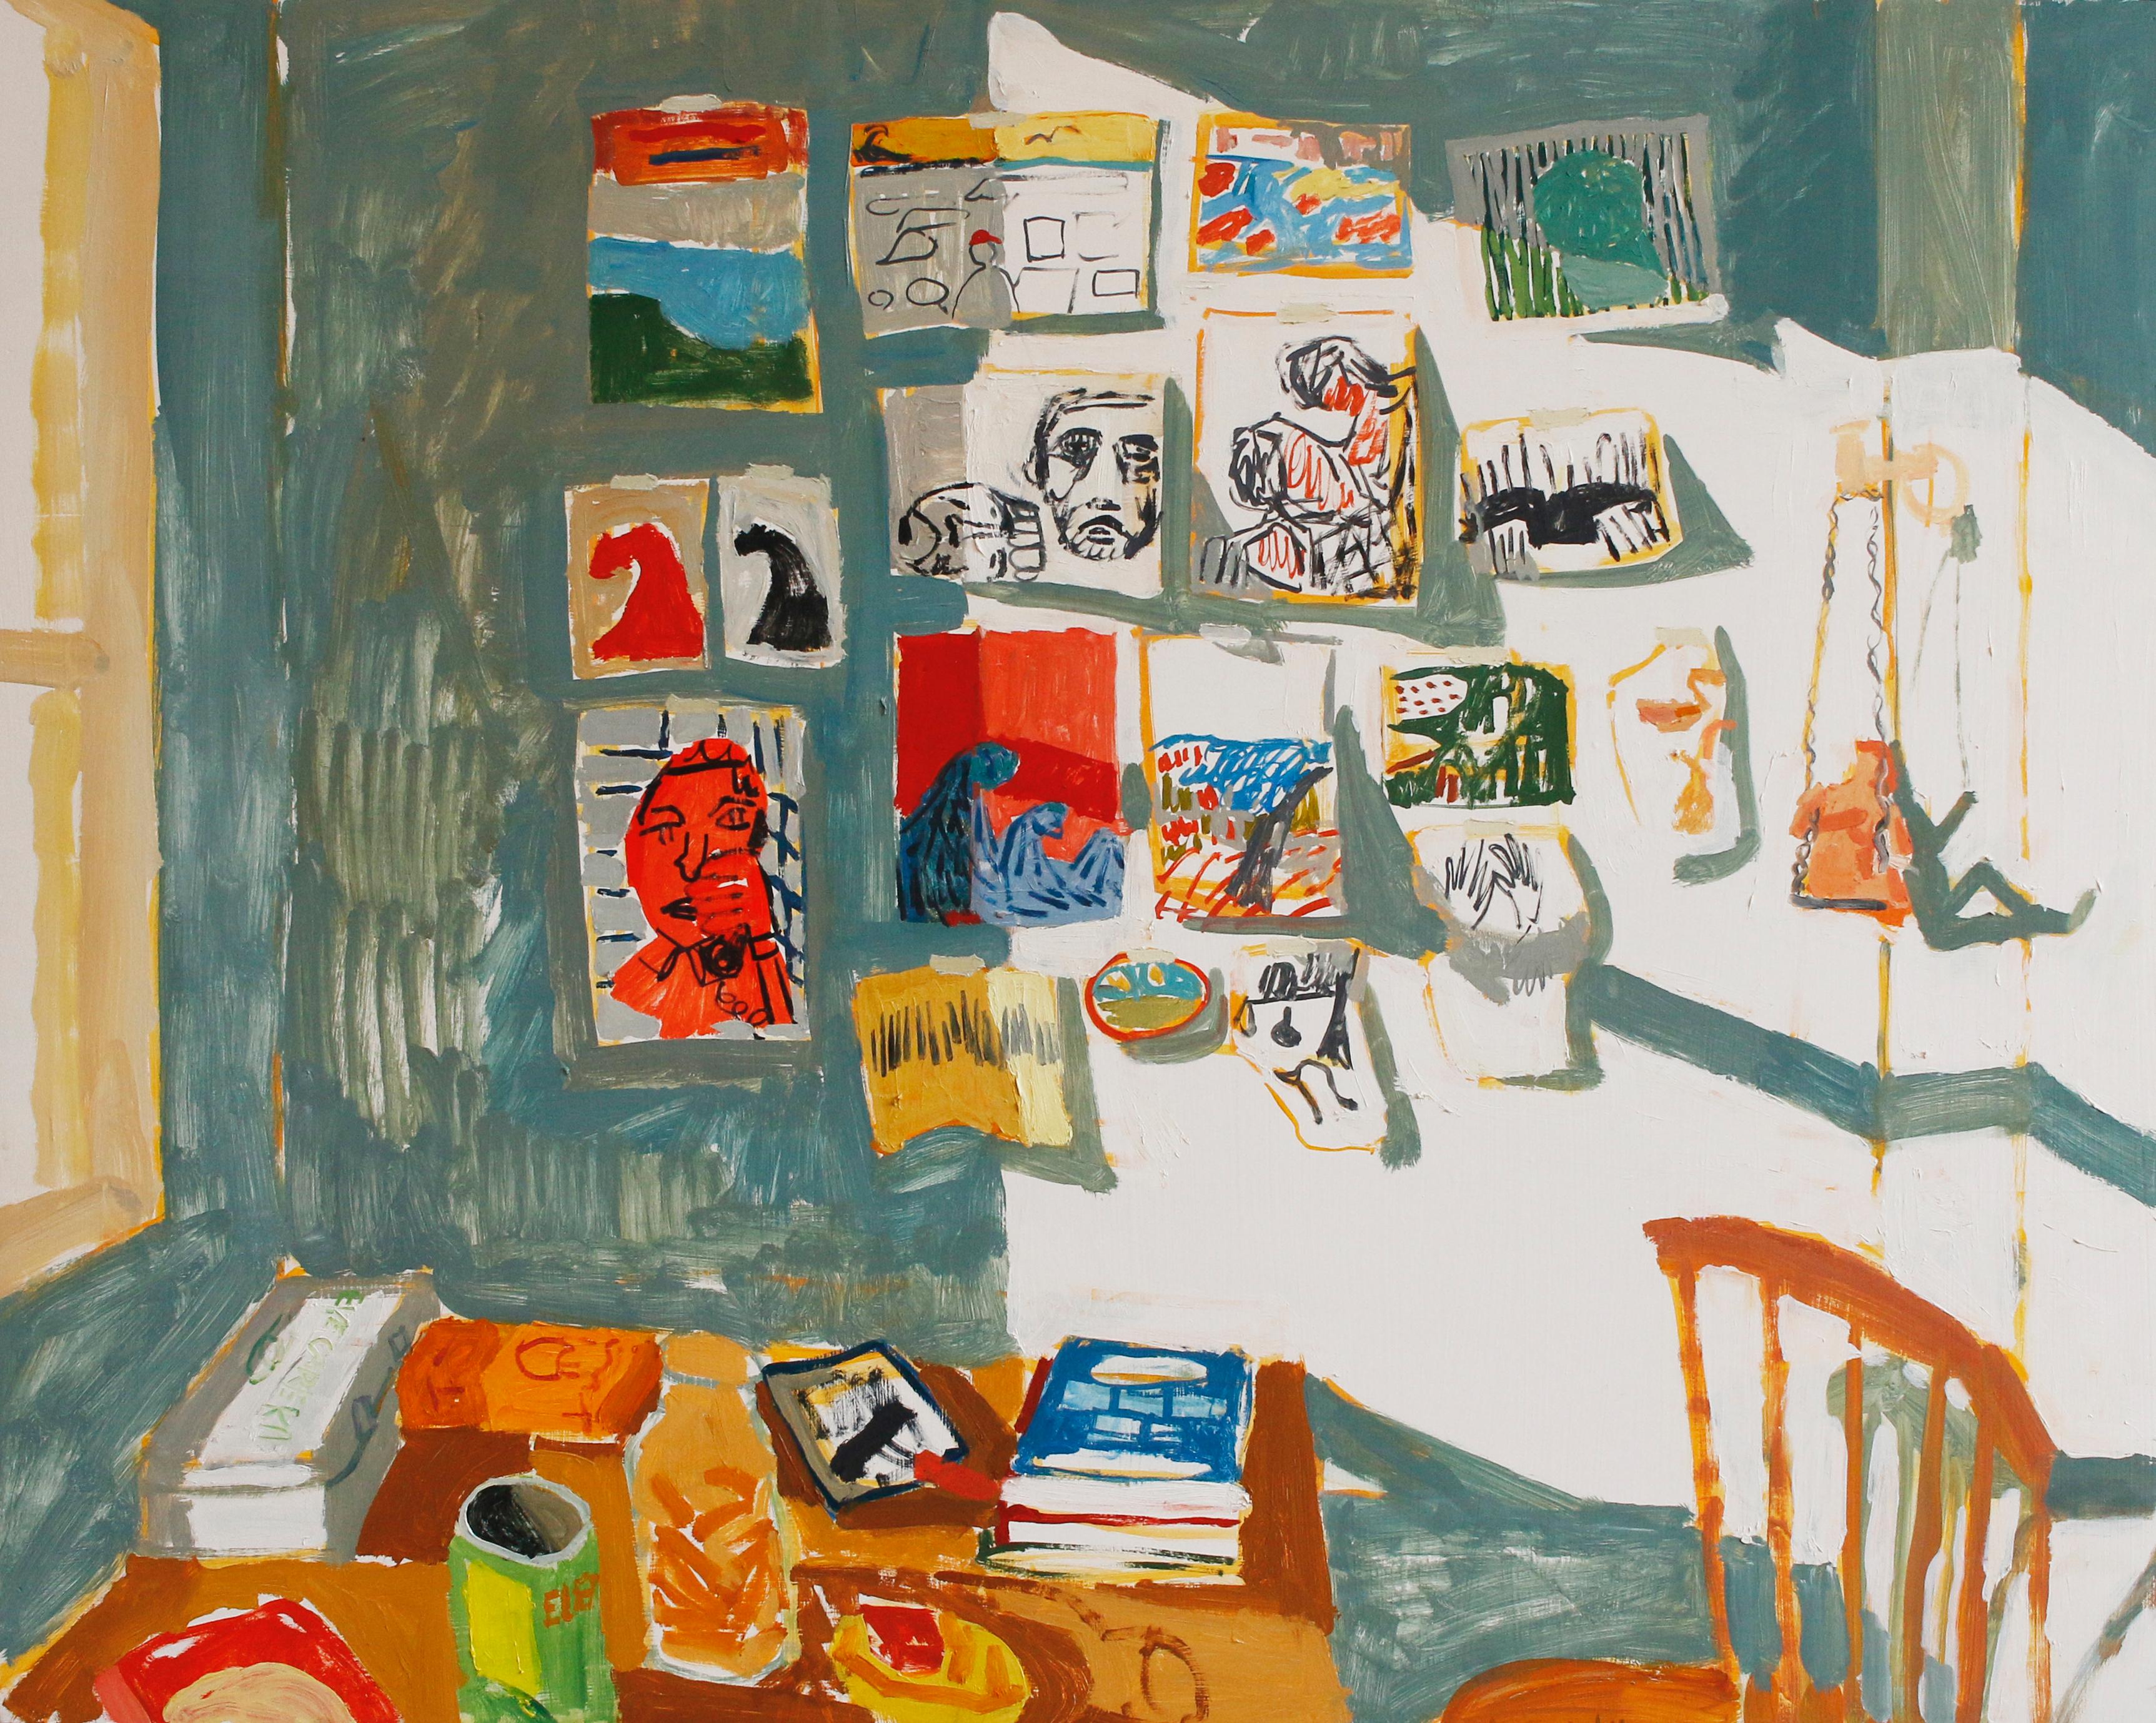 Sophie Treppendahl Interior Painting - Maddie's Wall, Interior with Window, Paintings, Still Life, Table, Wooden Chair